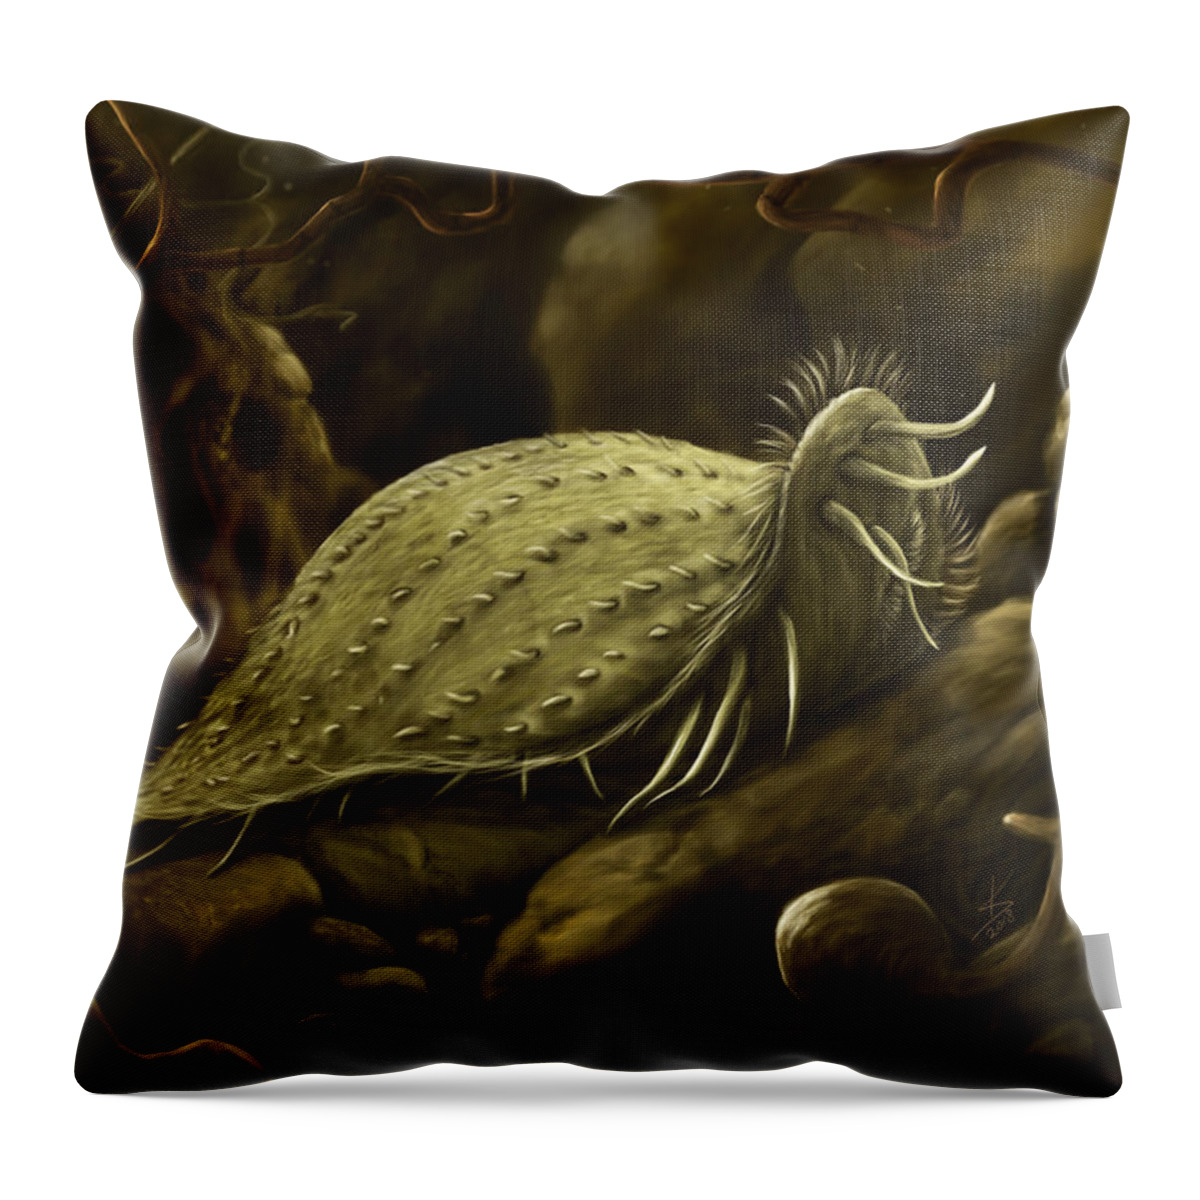 Protozoa Throw Pillow featuring the digital art Hypotrich ciliate by Kate Solbakk